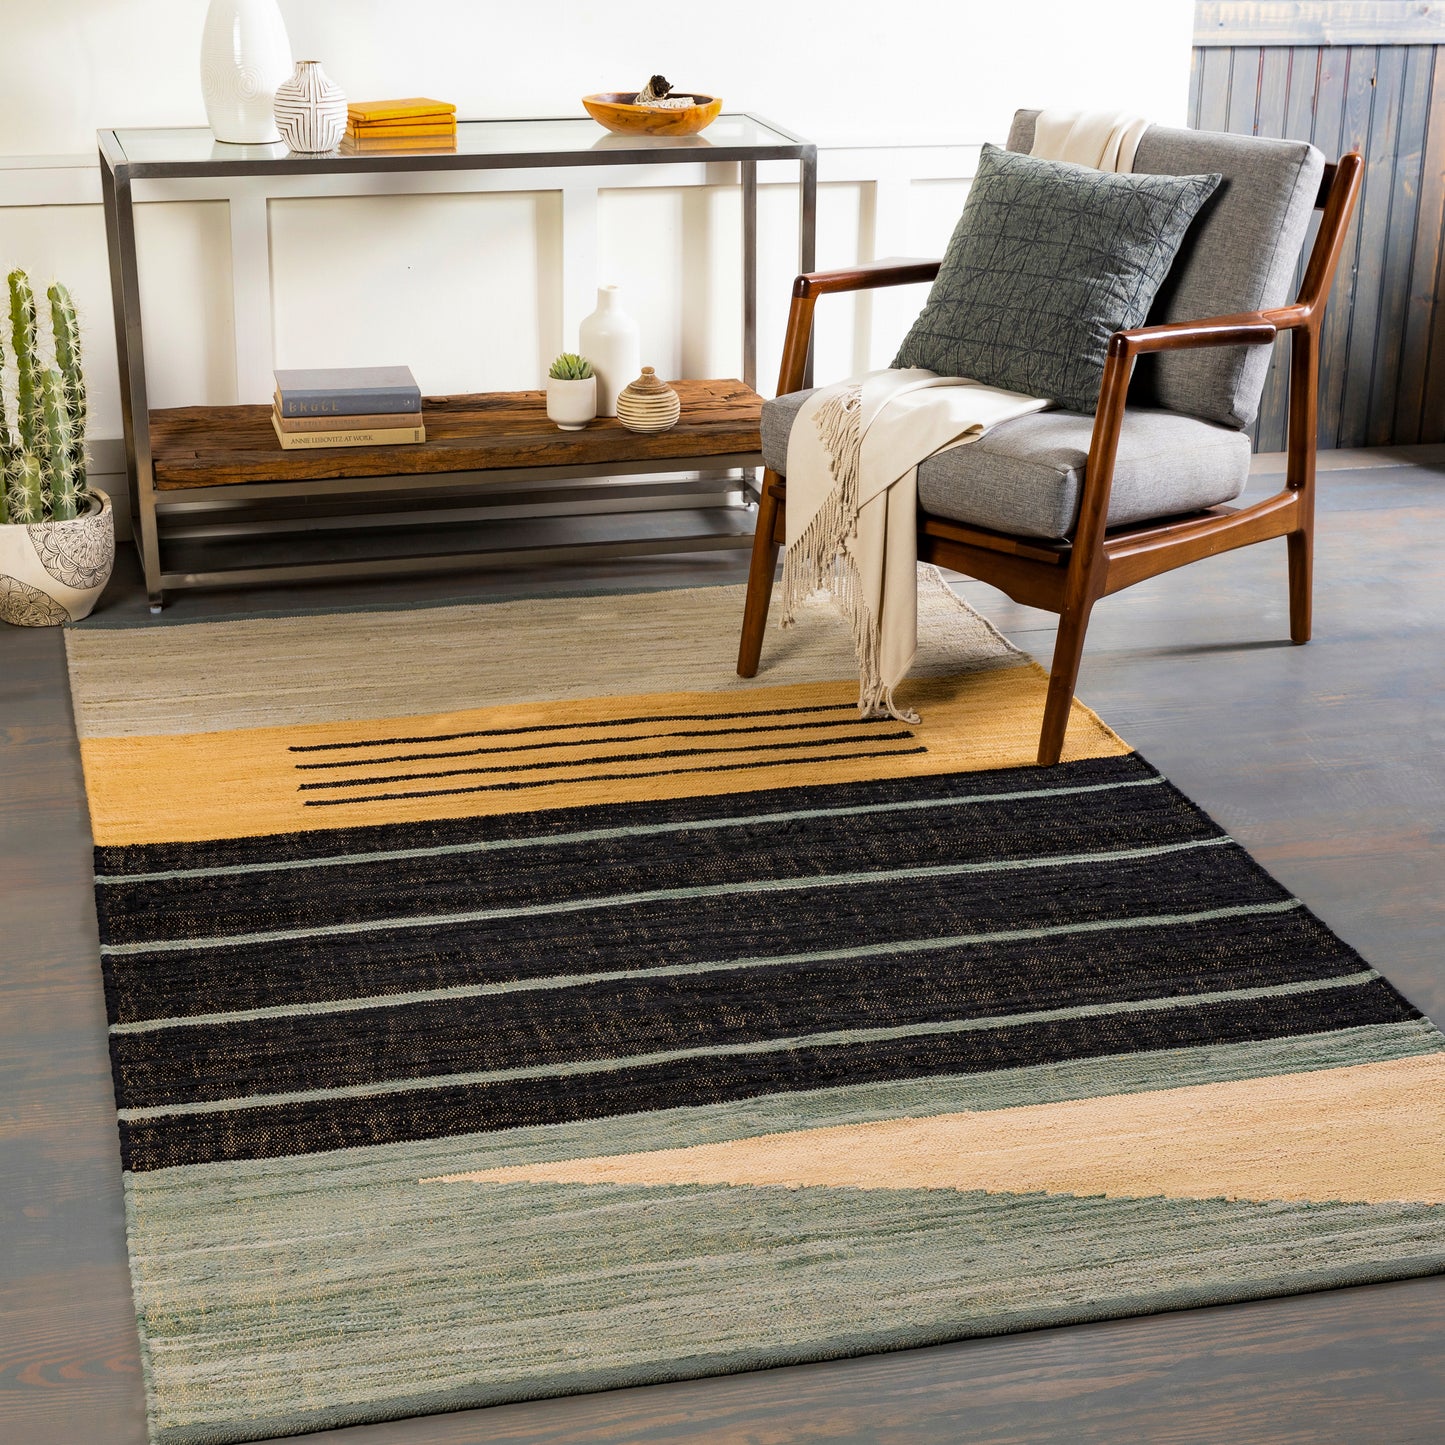 Fulham 26508 Hand Woven Cotton Indoor Area Rug by Surya Rugs